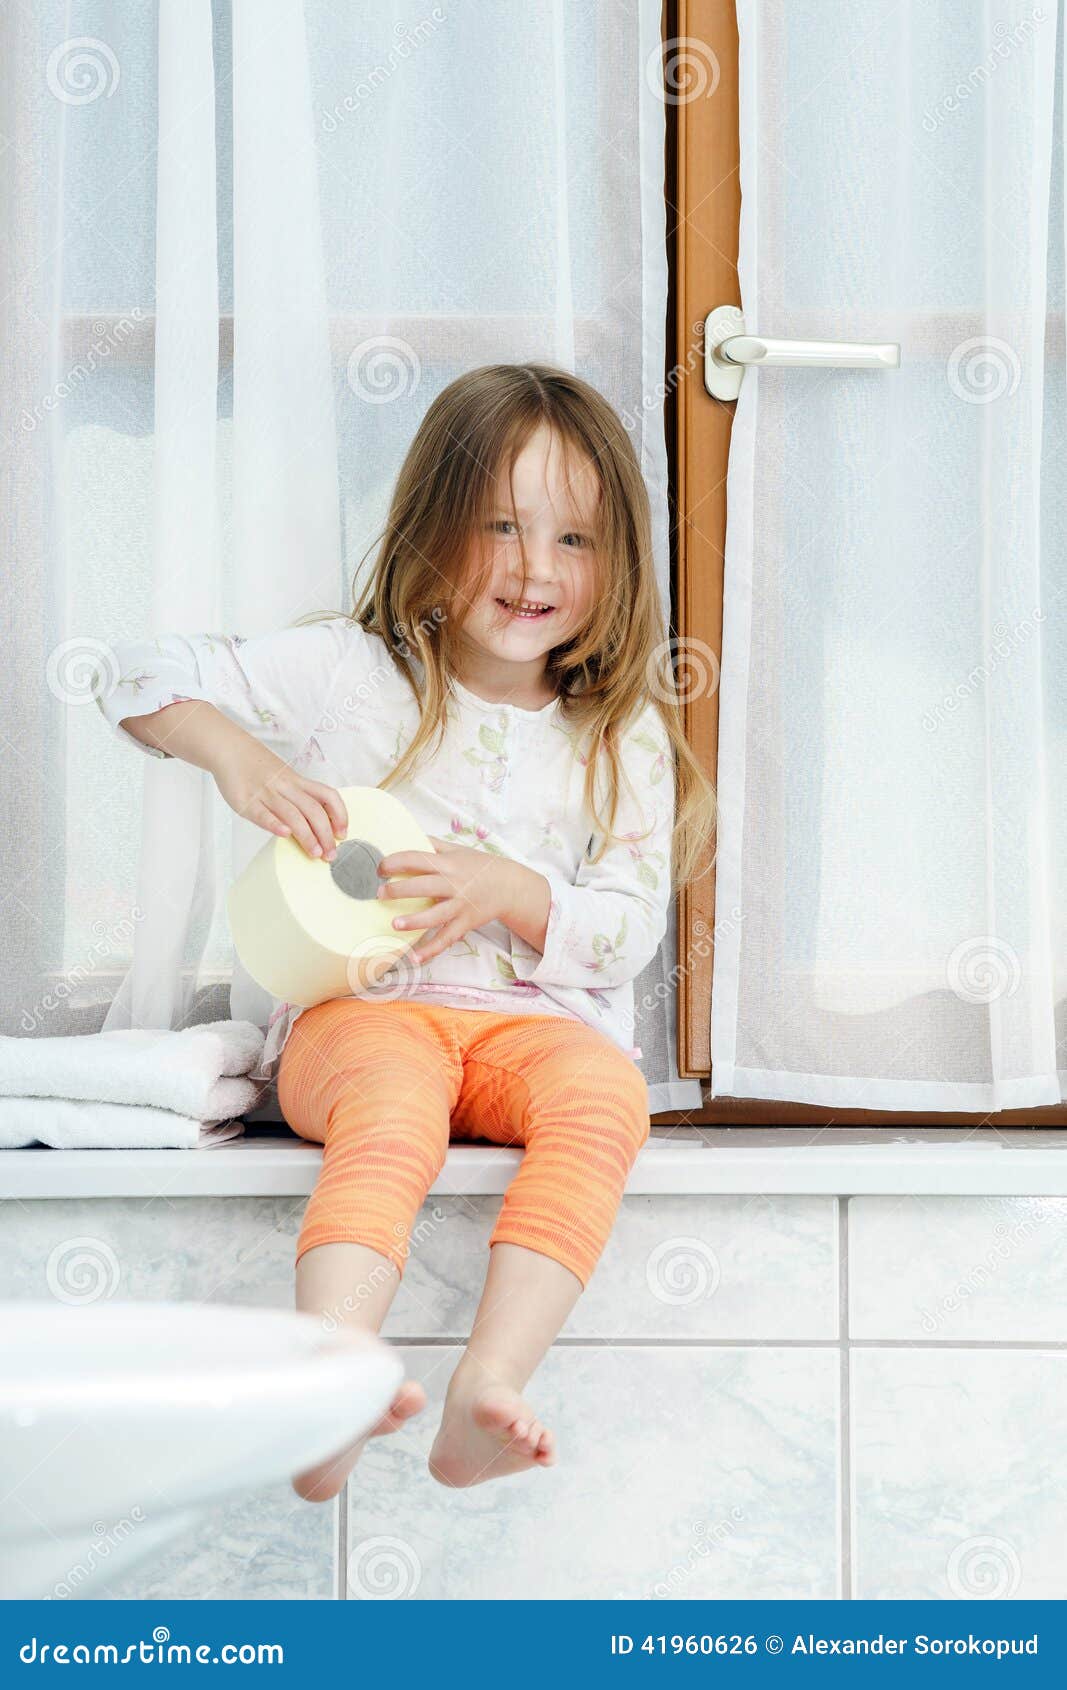 Cute Little Girl Playing With Toilet Paper Roll Stock Photo